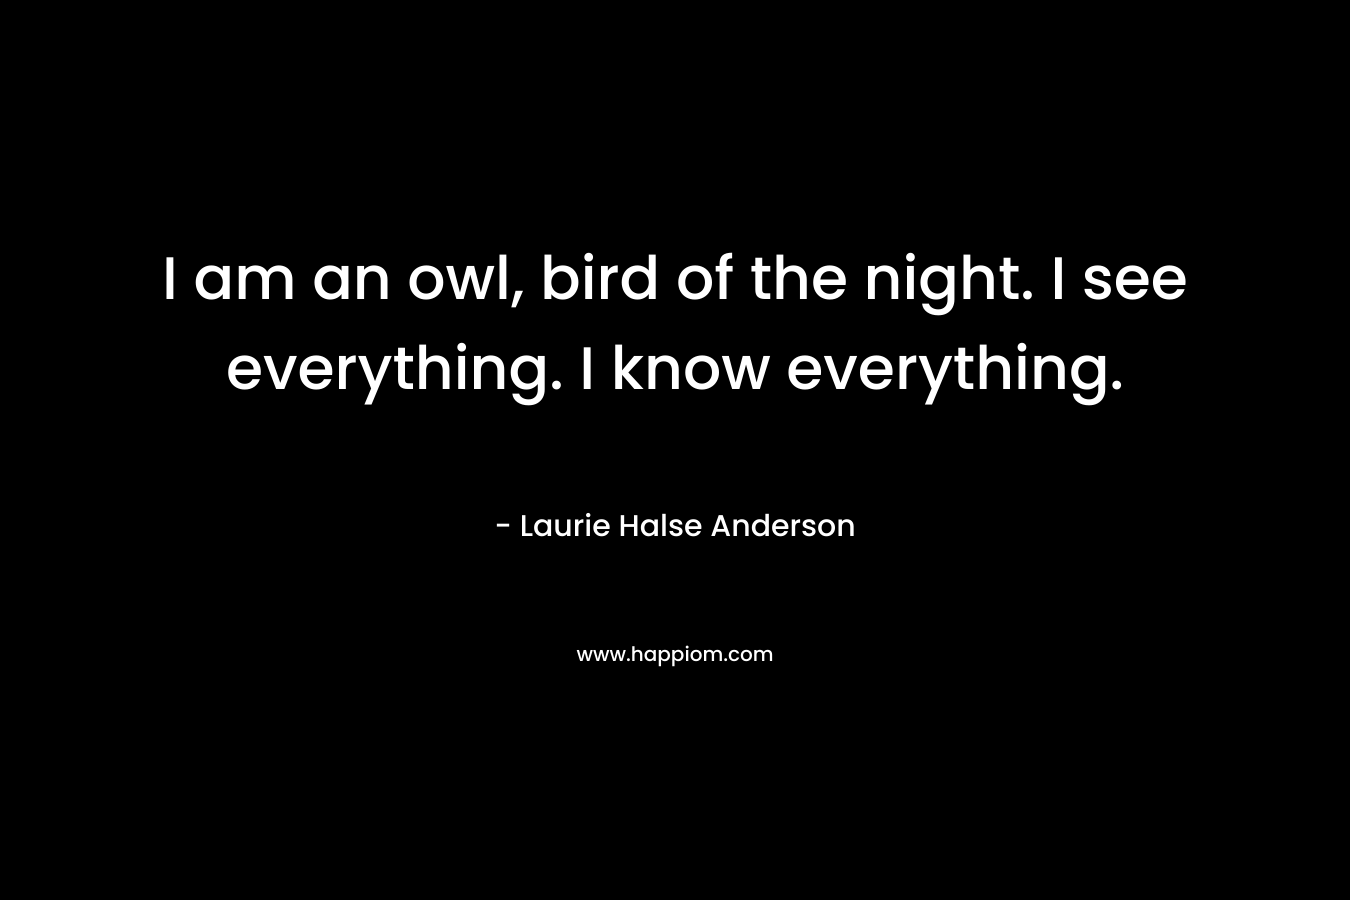 I am an owl, bird of the night. I see everything. I know everything.